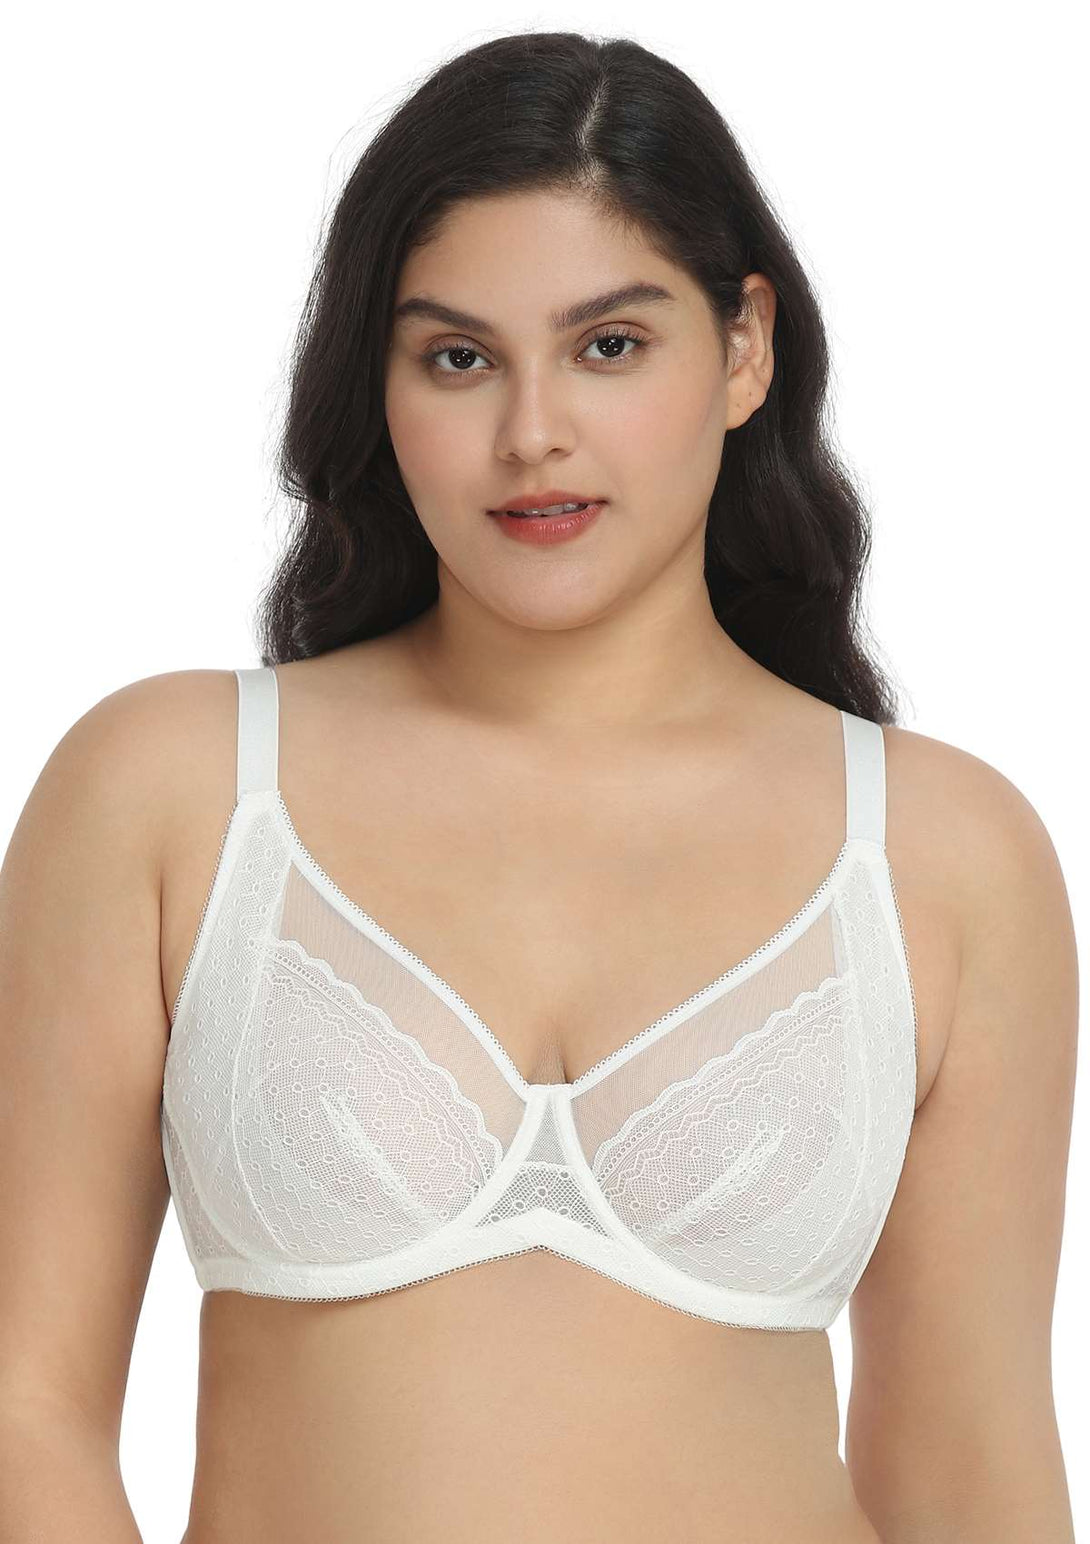 HSIA-EASTERBOGO Silhouette Polka Dot Lace Unlined Bra White / 34 / C